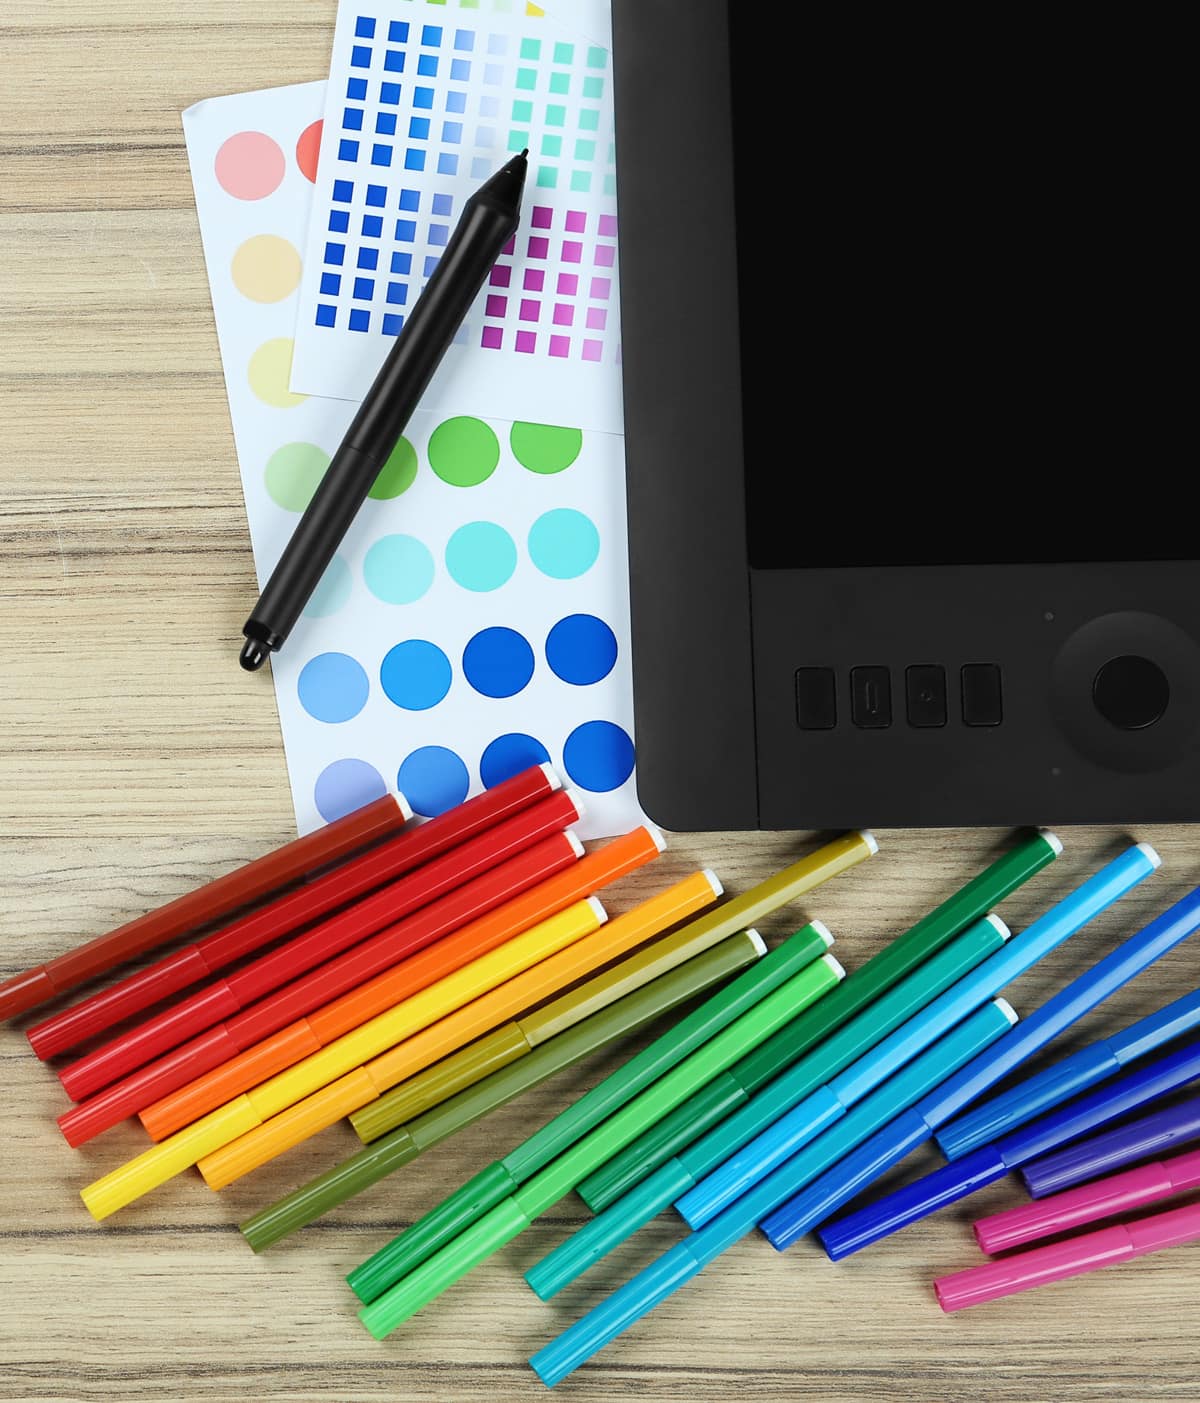 An array of colored markers lay on top of a sheet of color swatches. Everything is next to a design tablet with a stylus resting nearby.